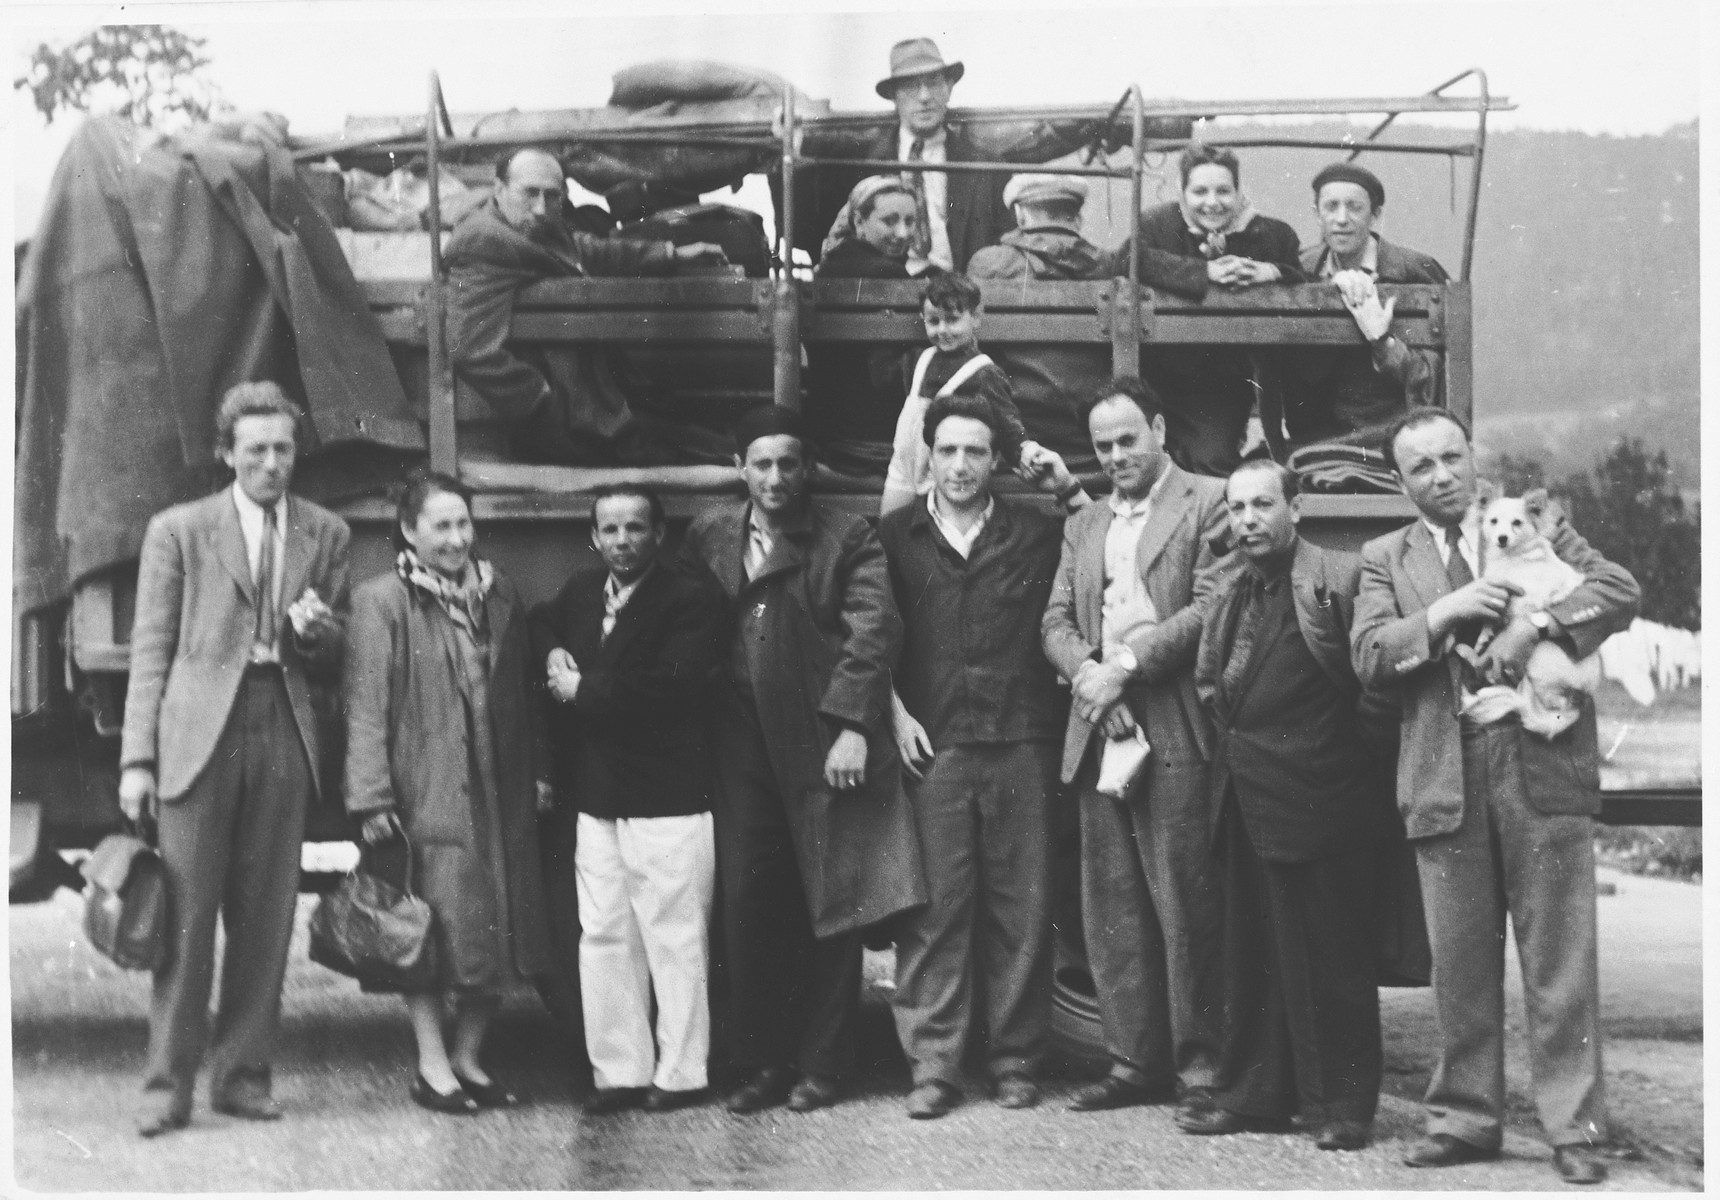 Jewish DPs gather in front of and inside an open truck in the Landsberg DP camp.